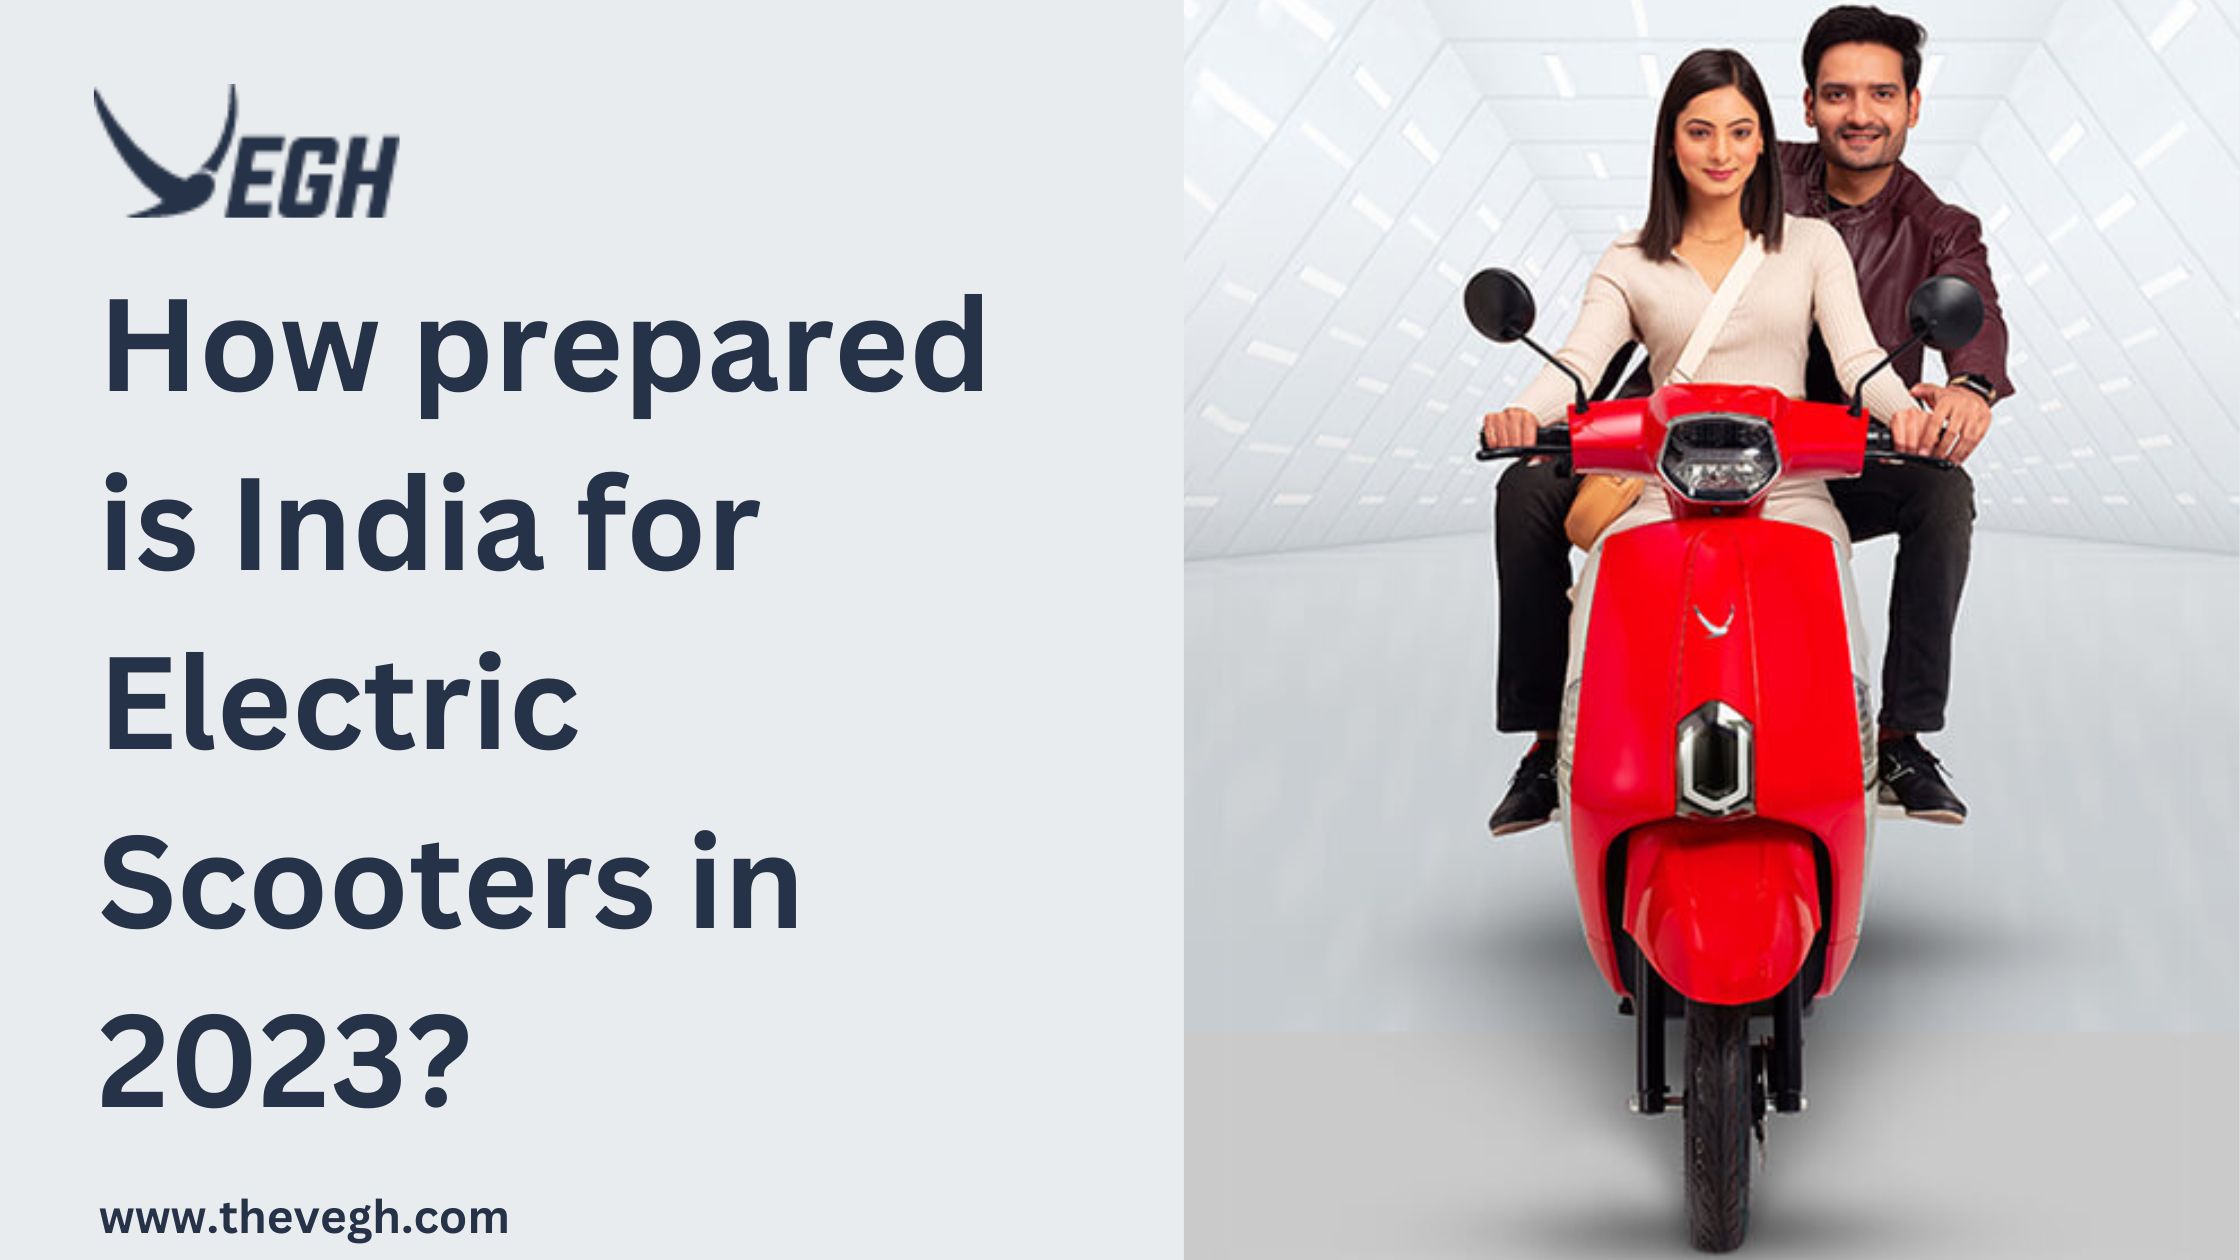 How prepared is India for Electric Scooters in 2023?